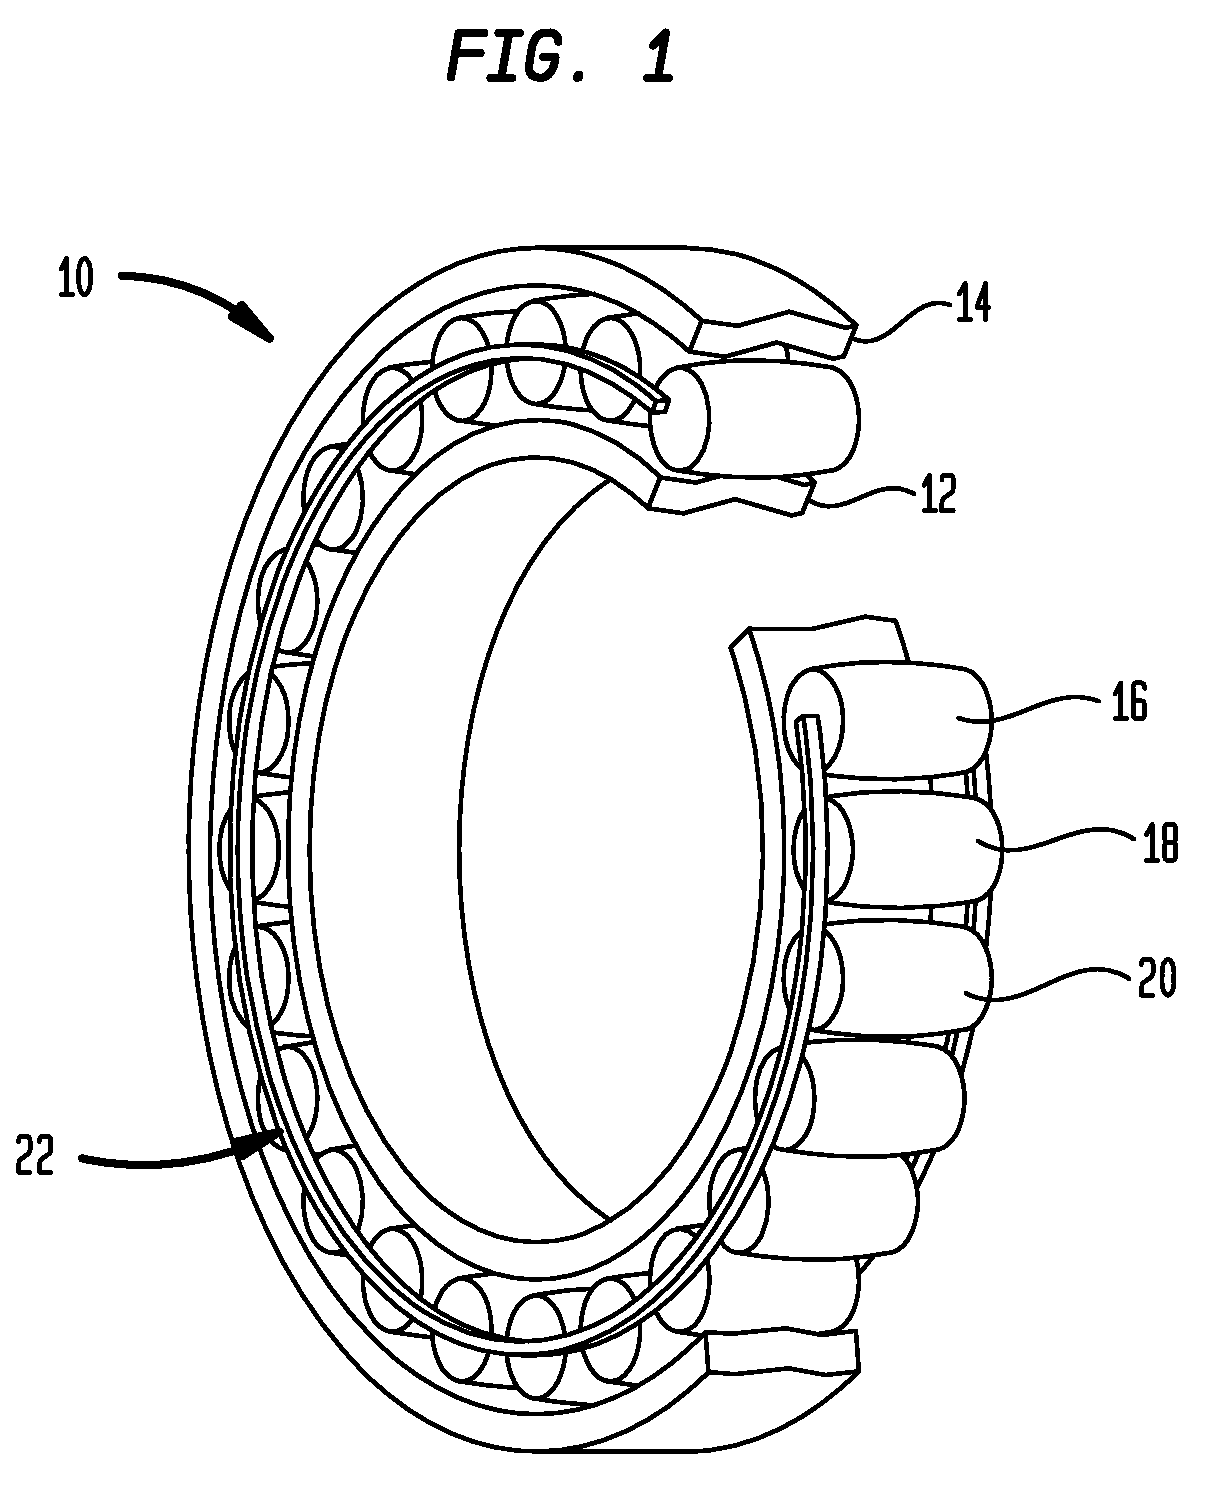 Bearing alignment tool and method of use